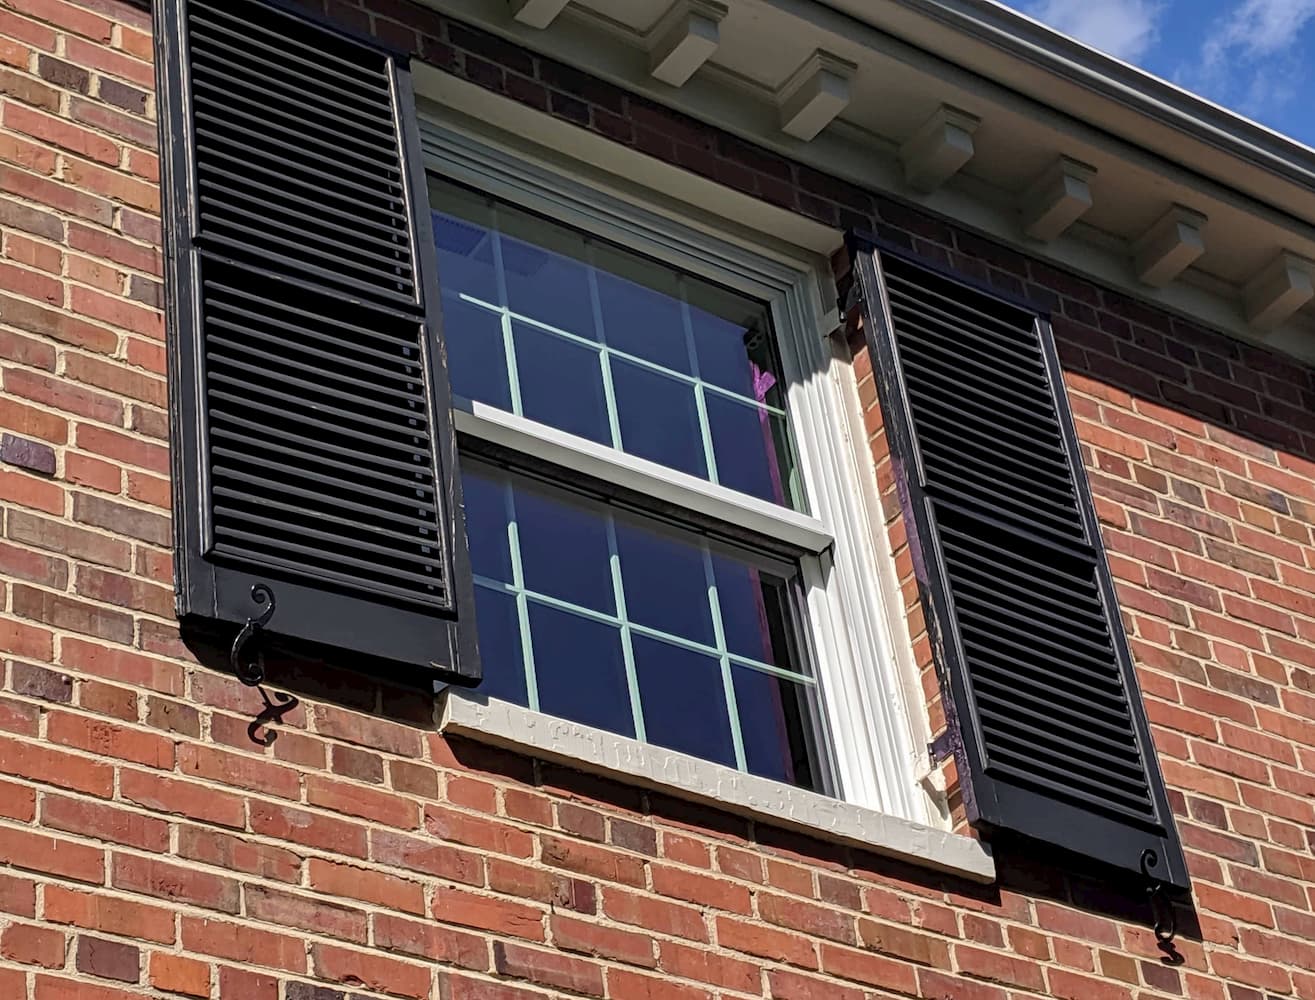 Wood double-hung window with traditional grille pattern on second story.